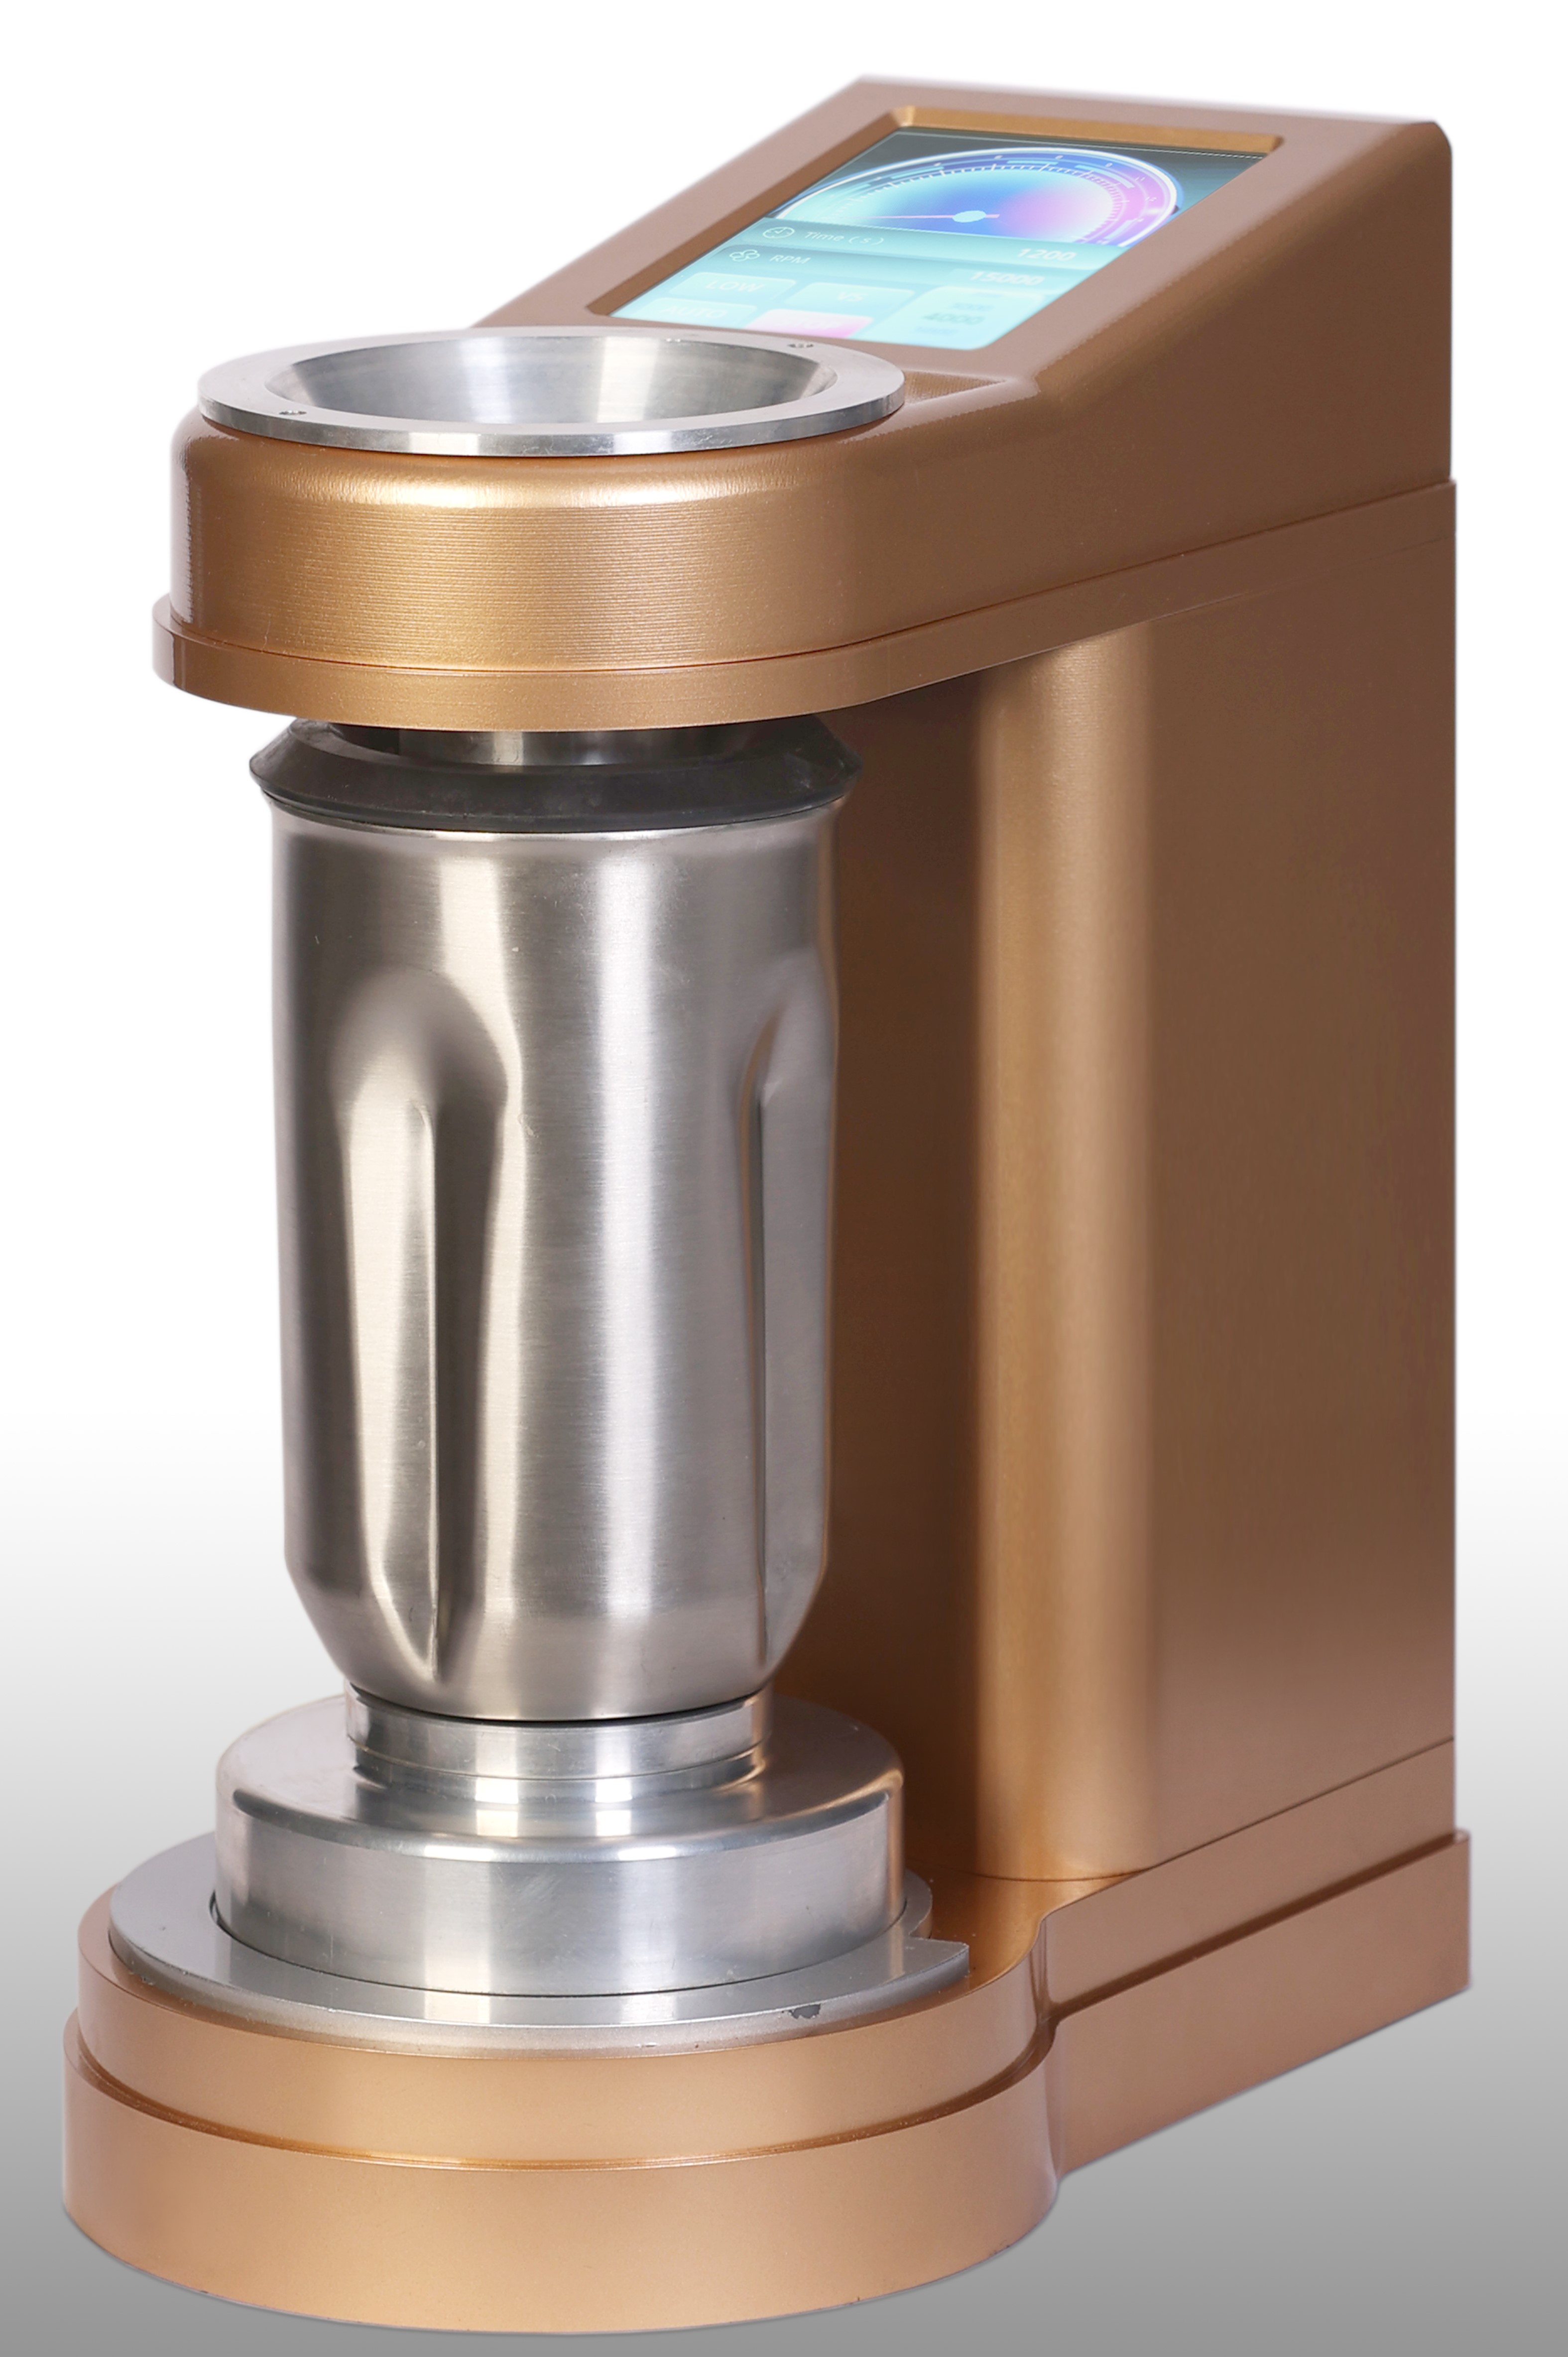 New product update- Patented constant speed mixer